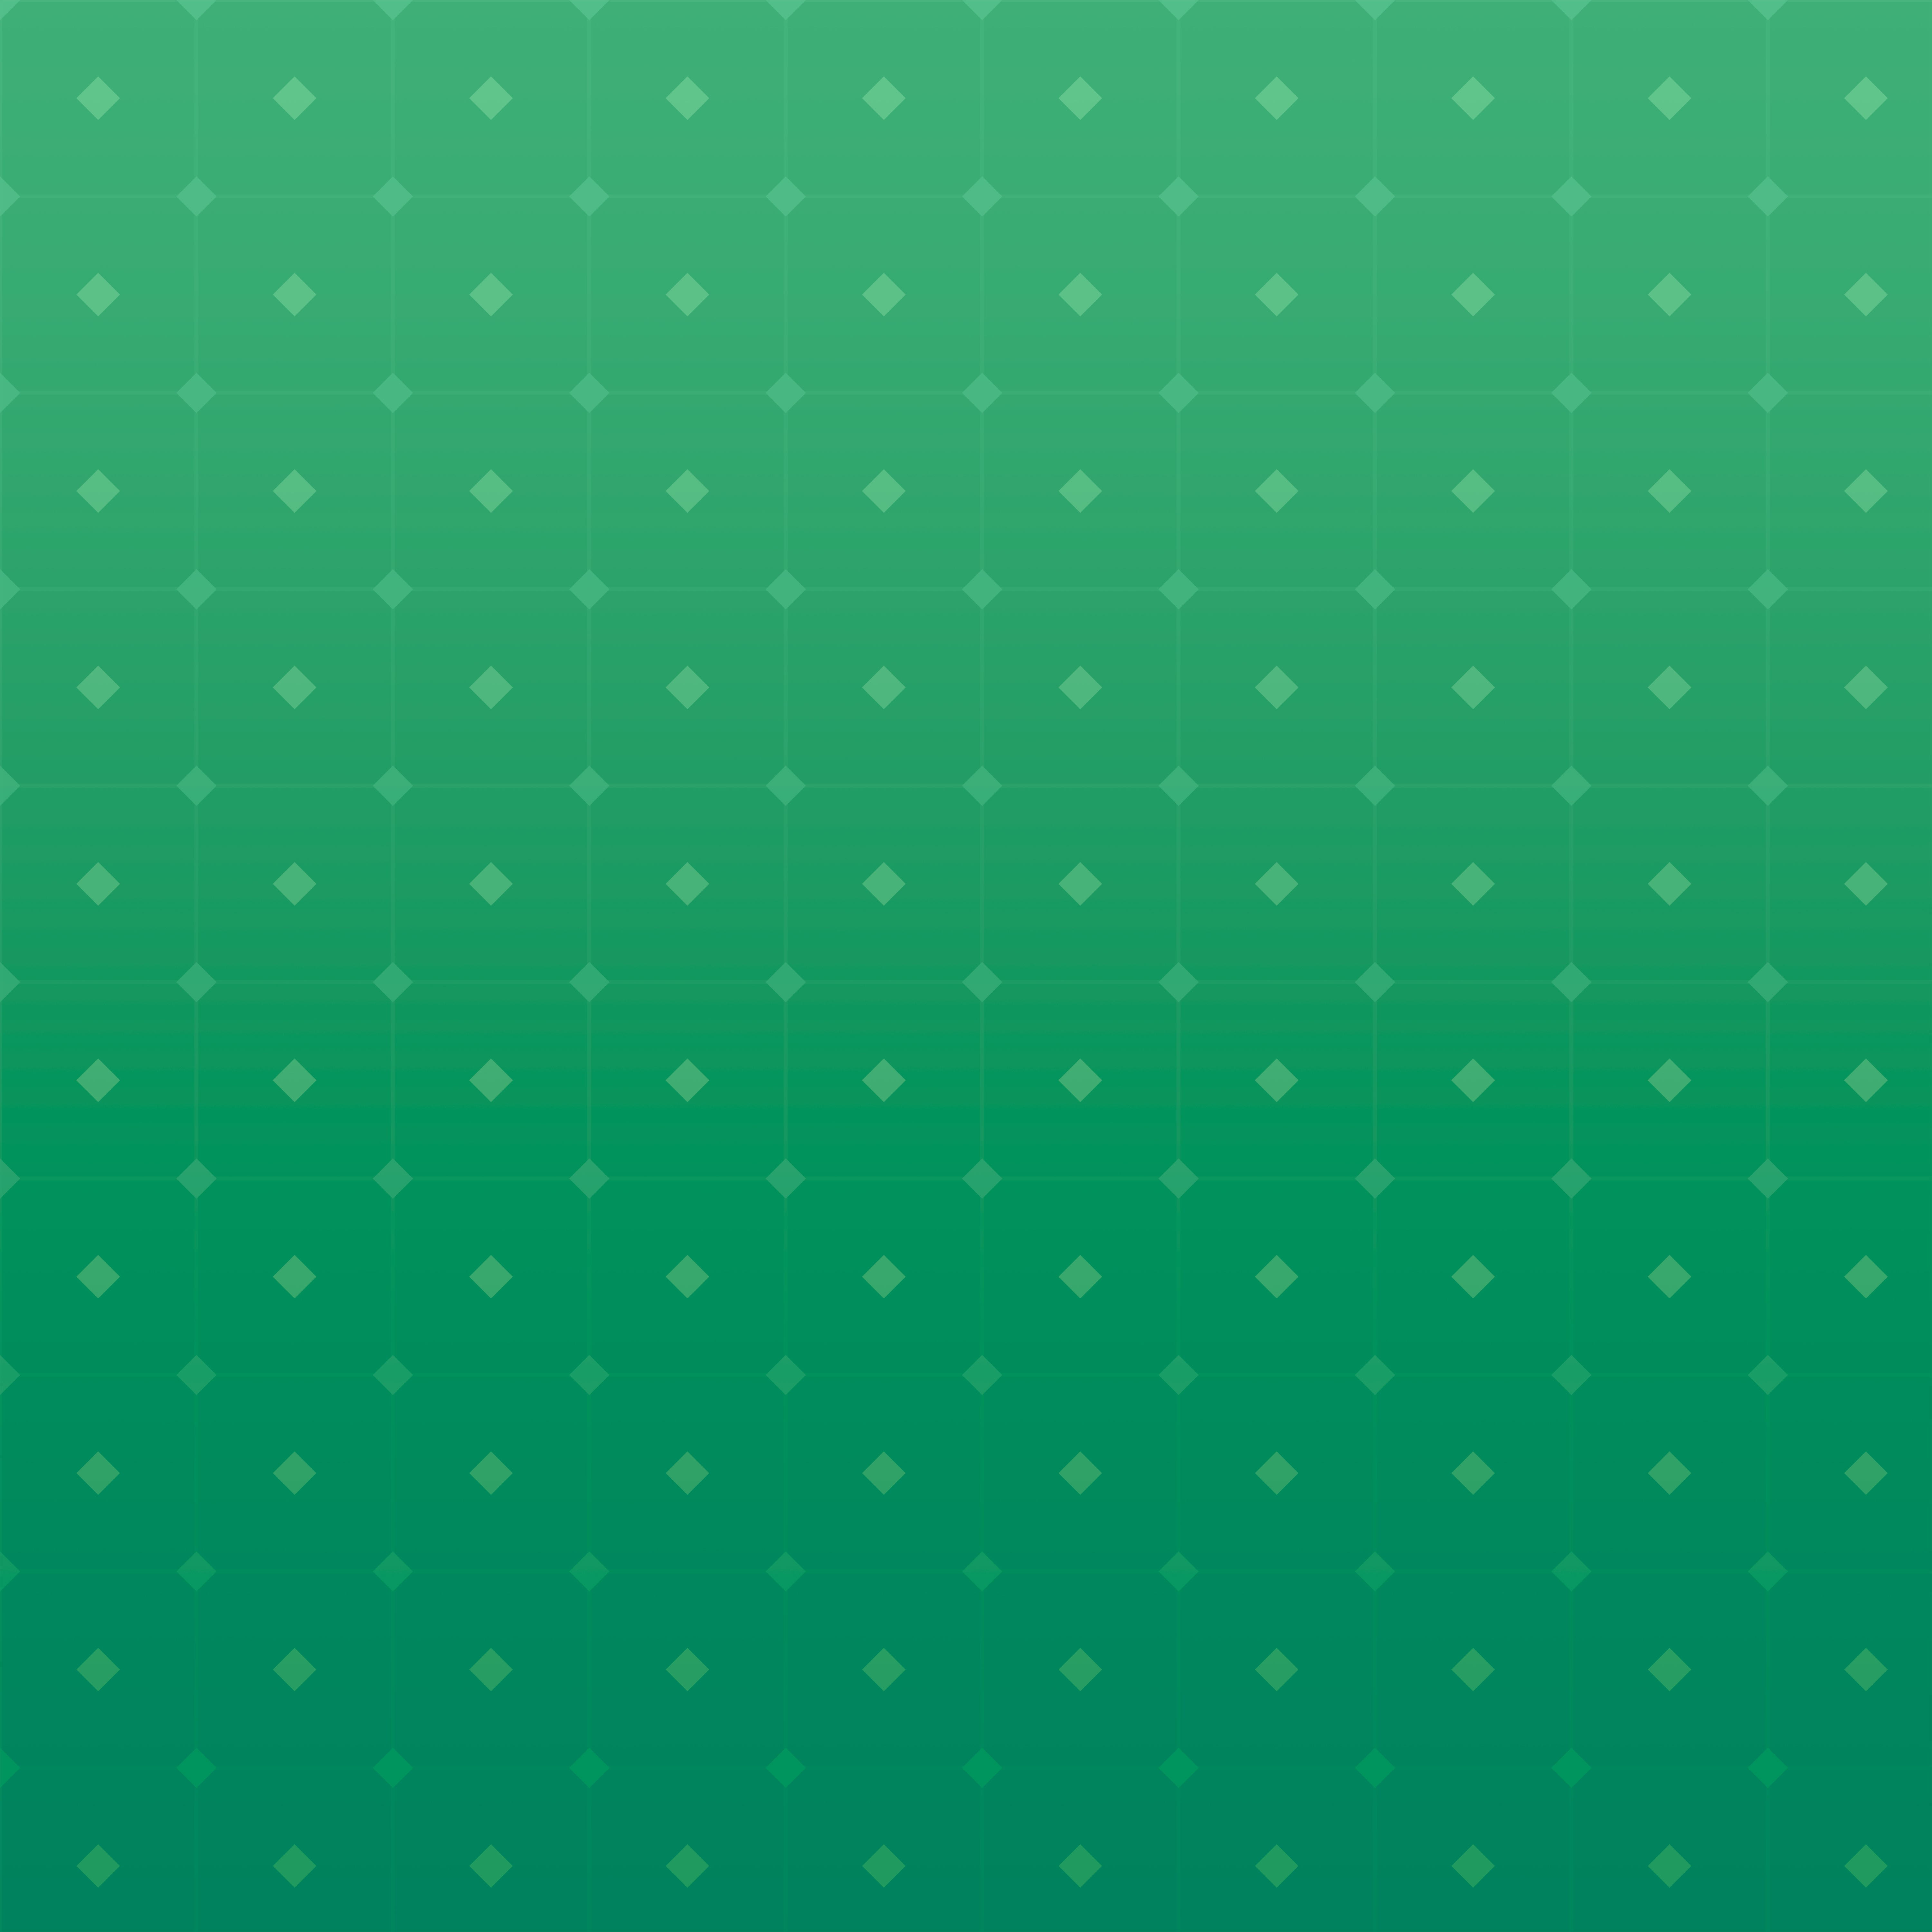 grid, gradient, green, pattern, texture, textures, squares wallpapers for tablet